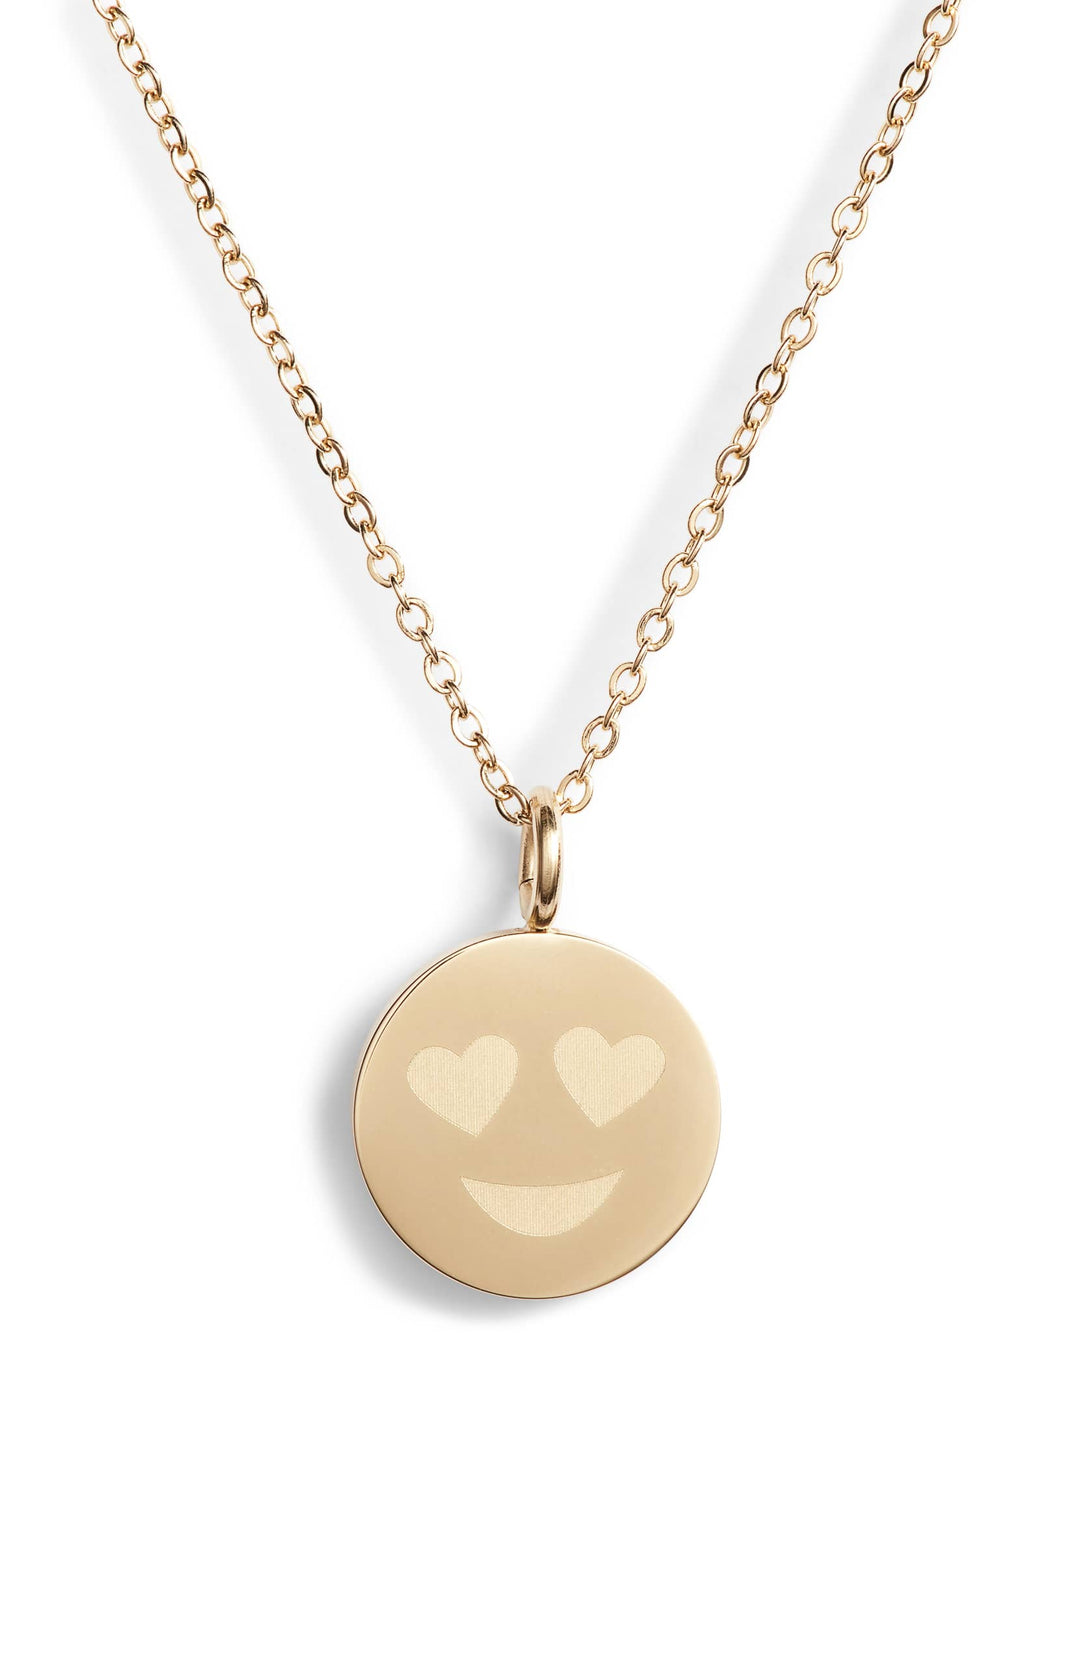 Luxe Charmy Necklace | Heart Eyes Emoji